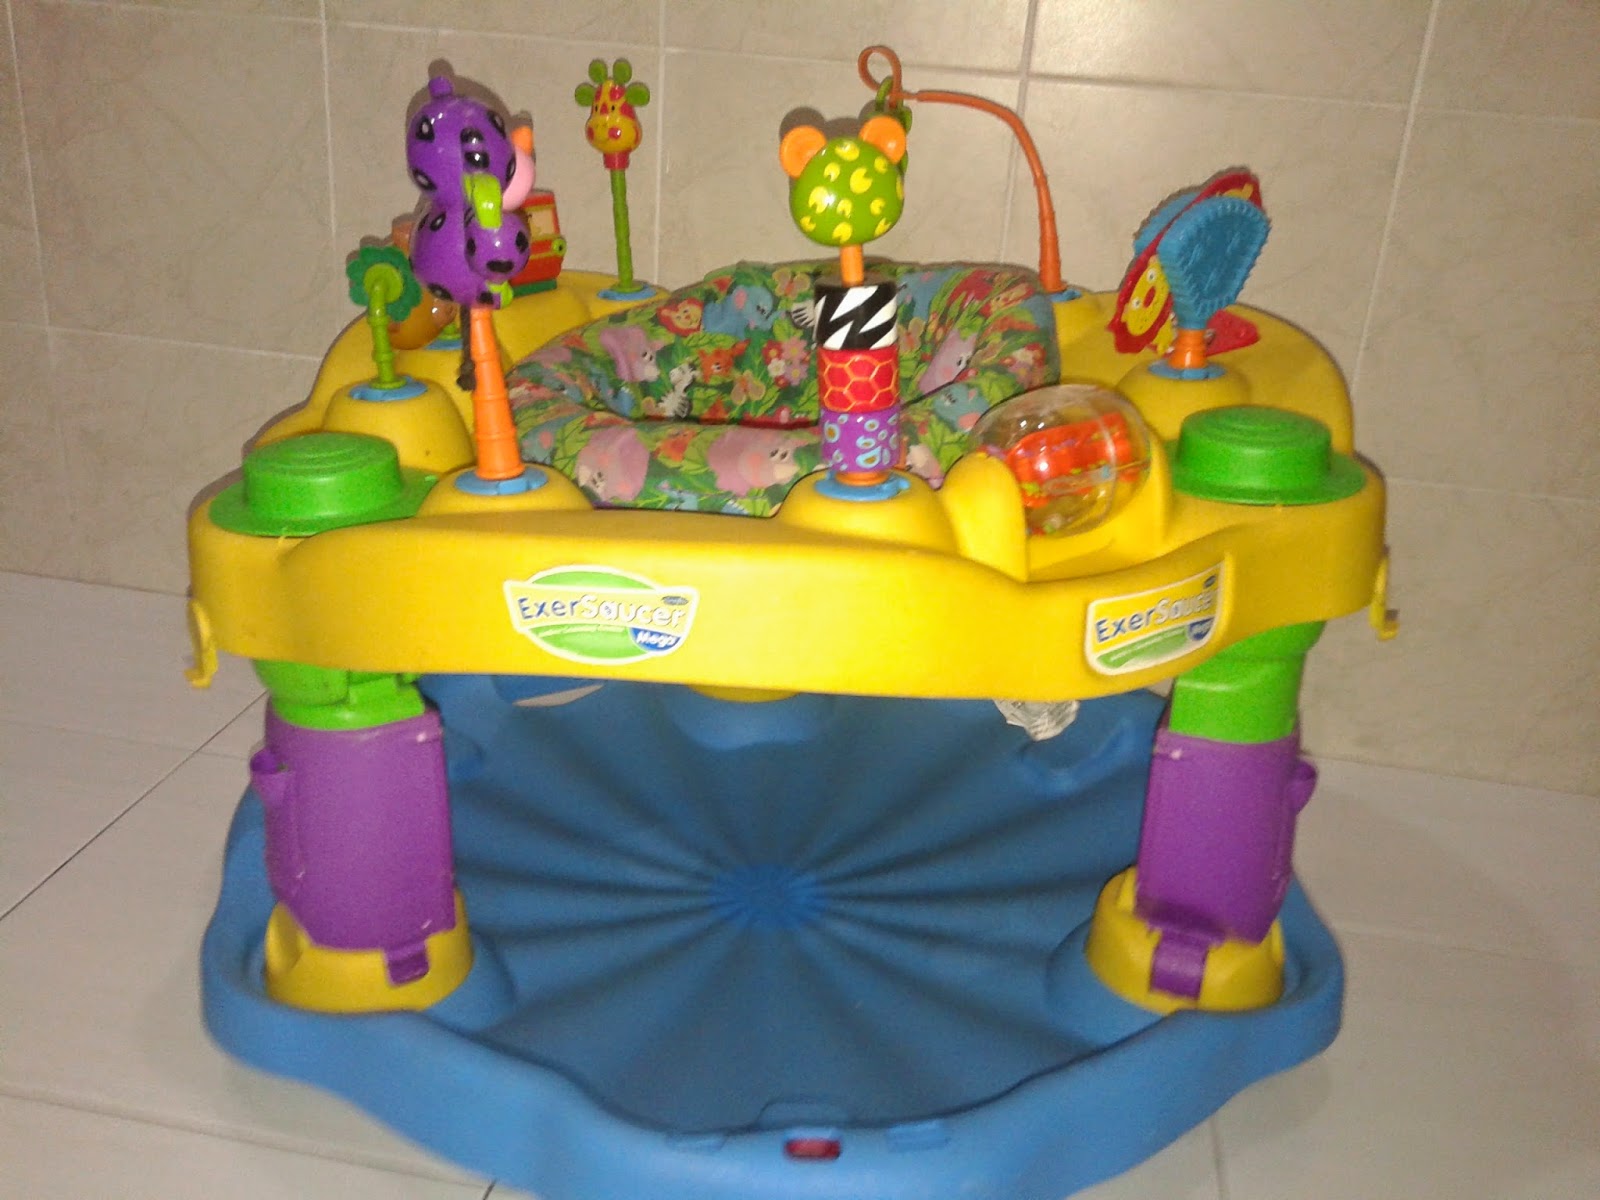 foldable exersaucer